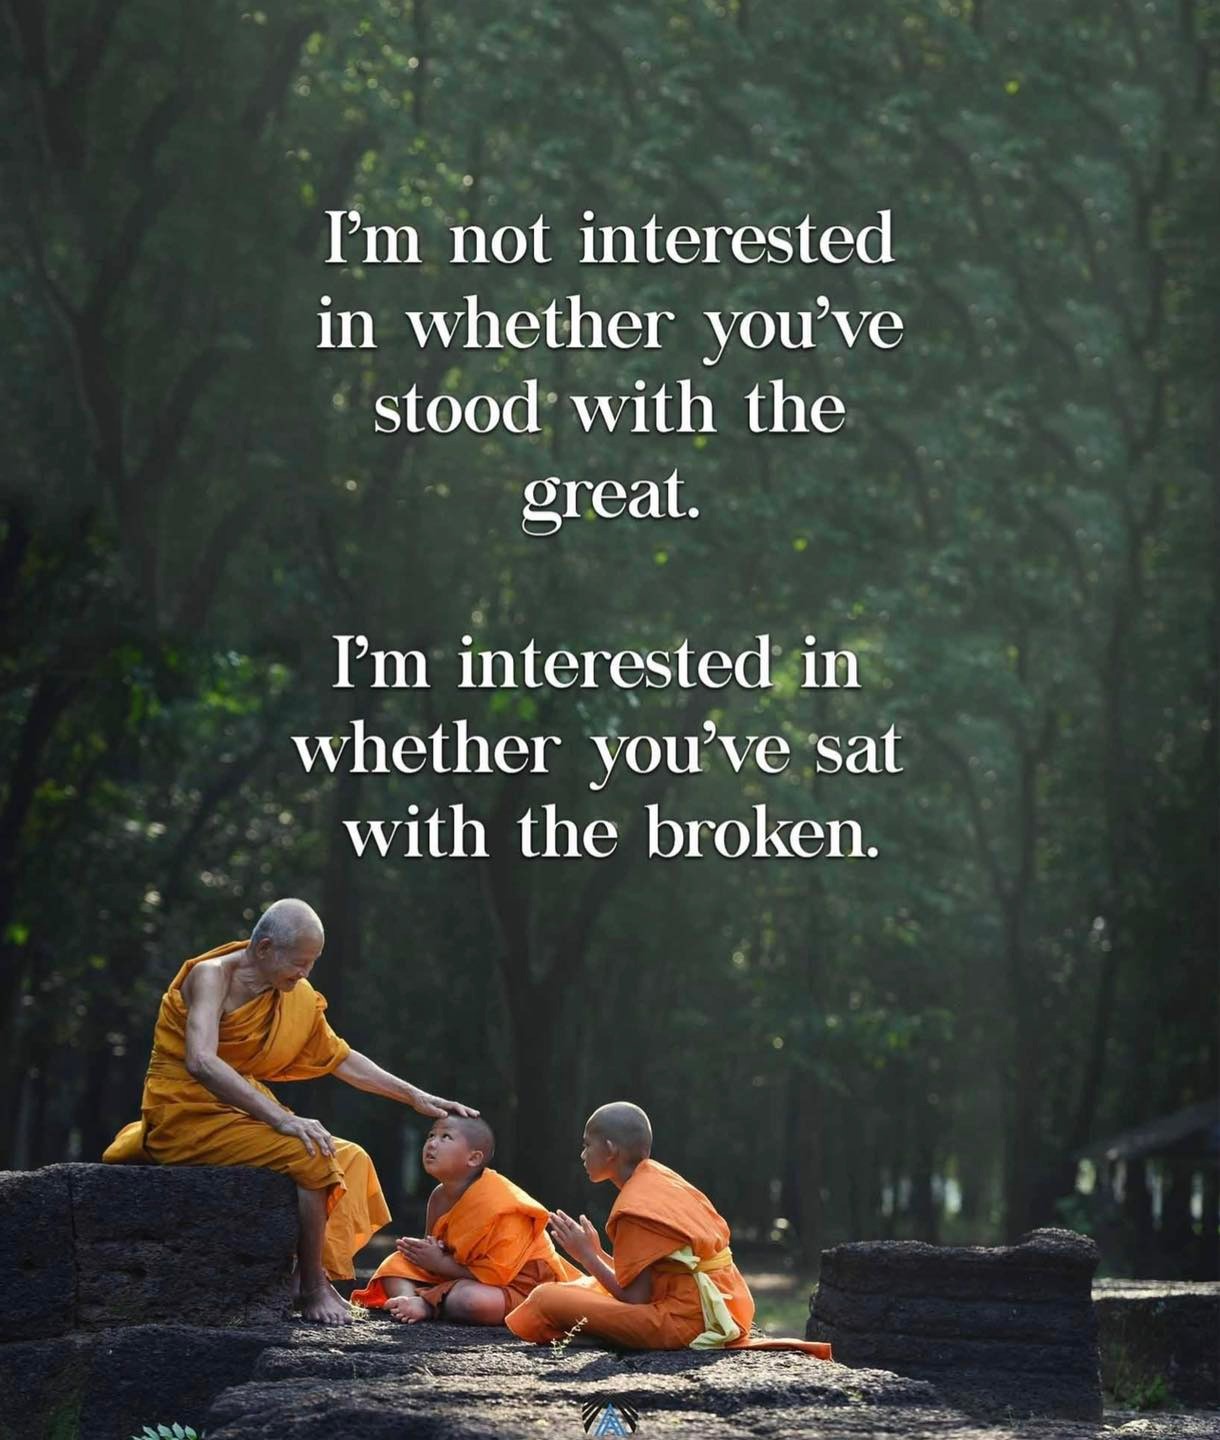 I’m not interested in whether you’ve stood with the great; I’m interested in whether you’ve sat with the broken.’